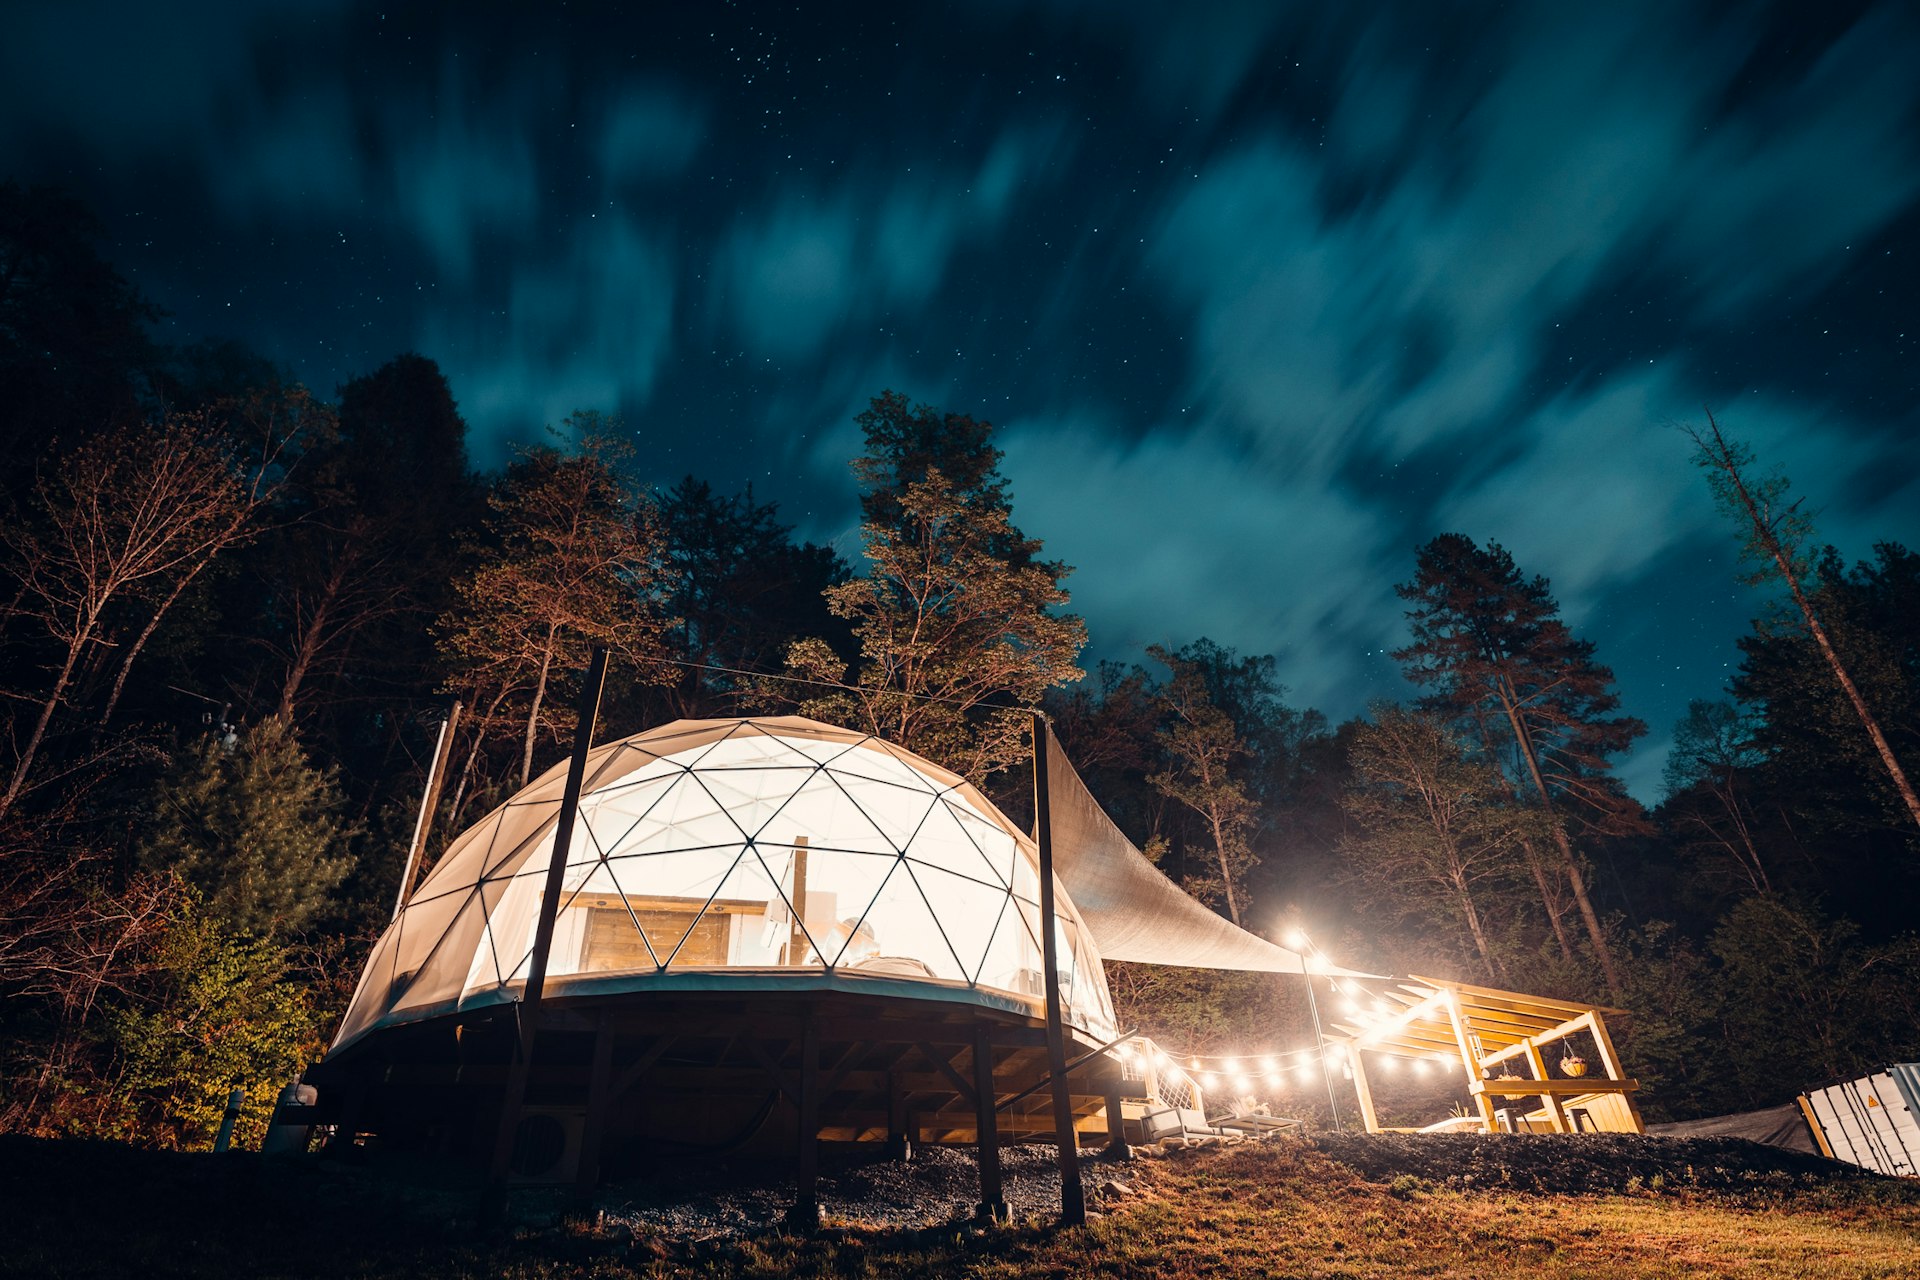 A picture of the glamping dome under a starry sky